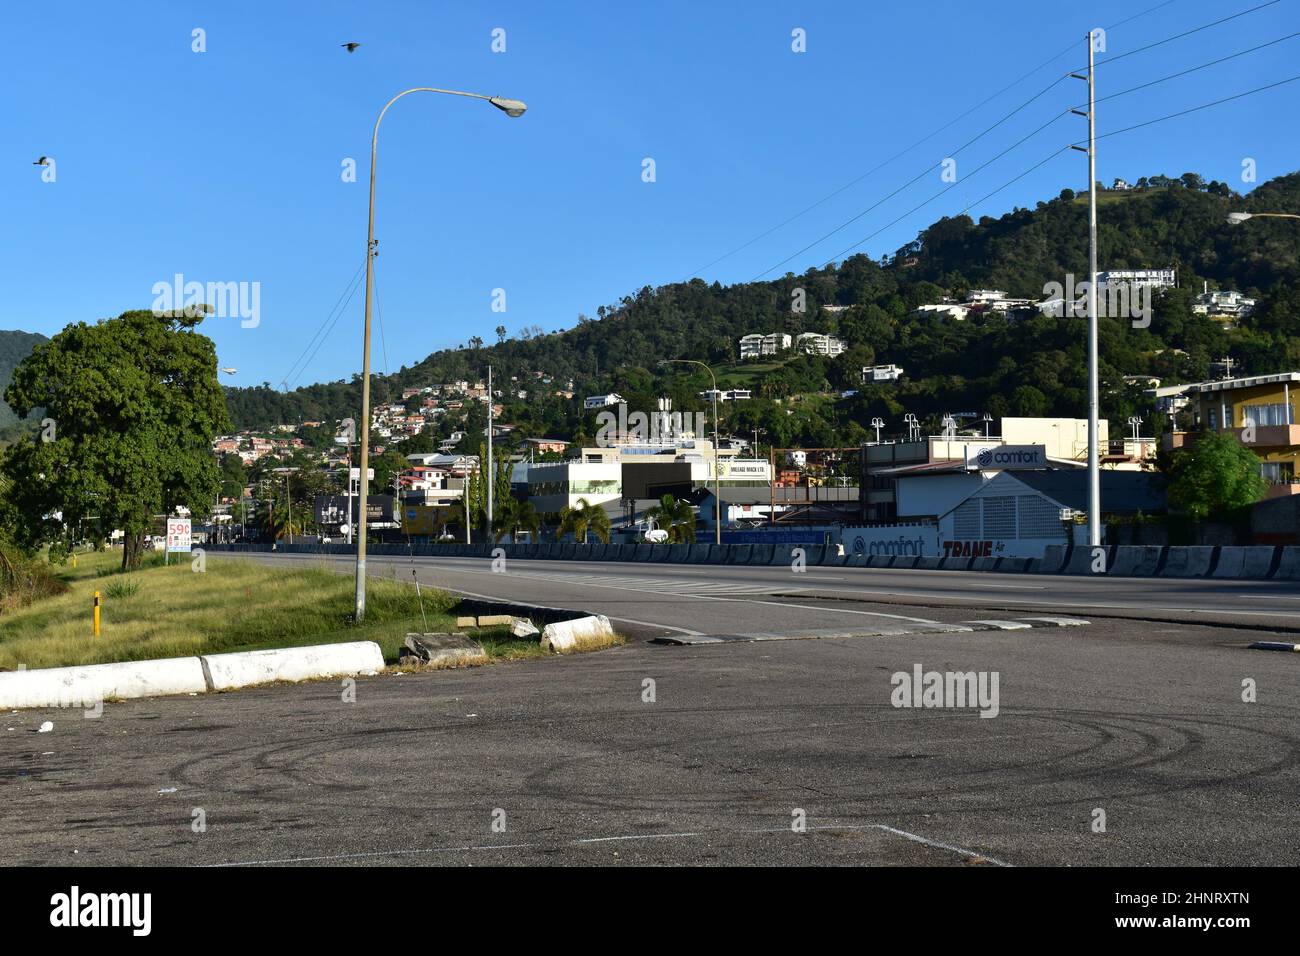 Mucurapo, Trinidad and Tobago-January 16, 2021: View of the roadway from the Mucurapo foreshore. Several commercial & residential buildings are seen. Stock Photo